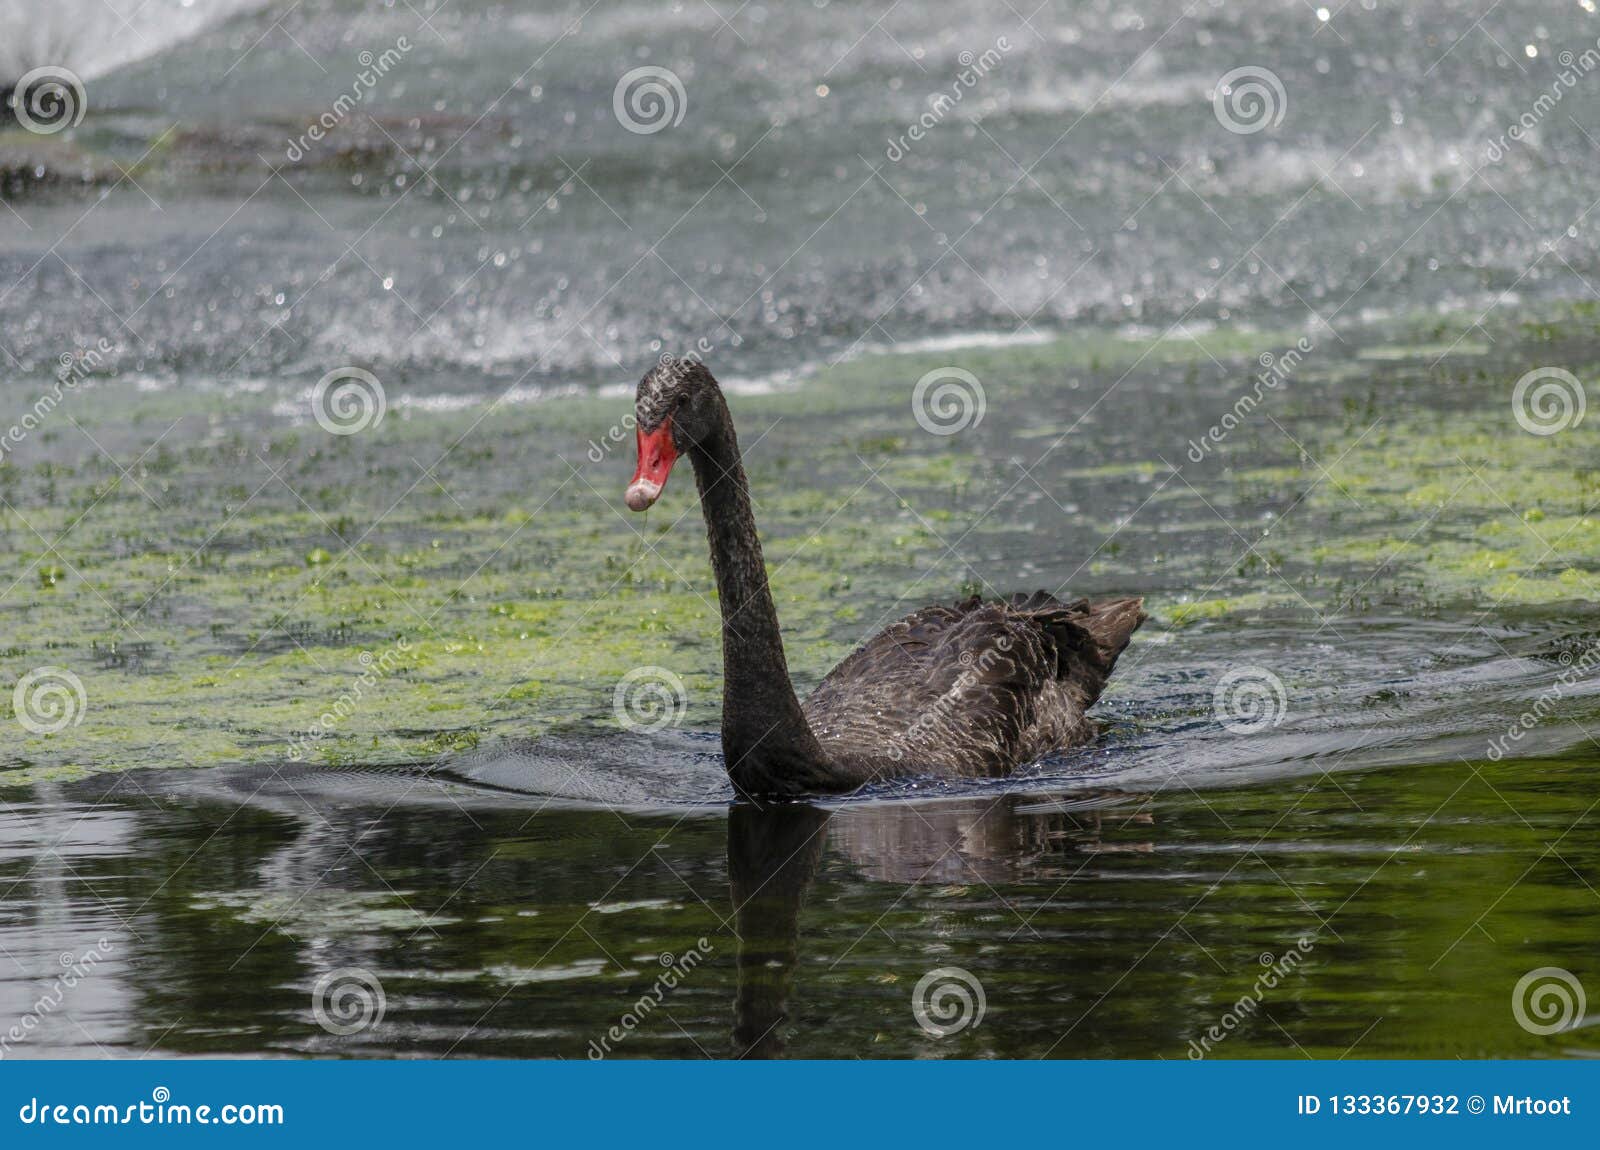 black swan in the lake at gympie